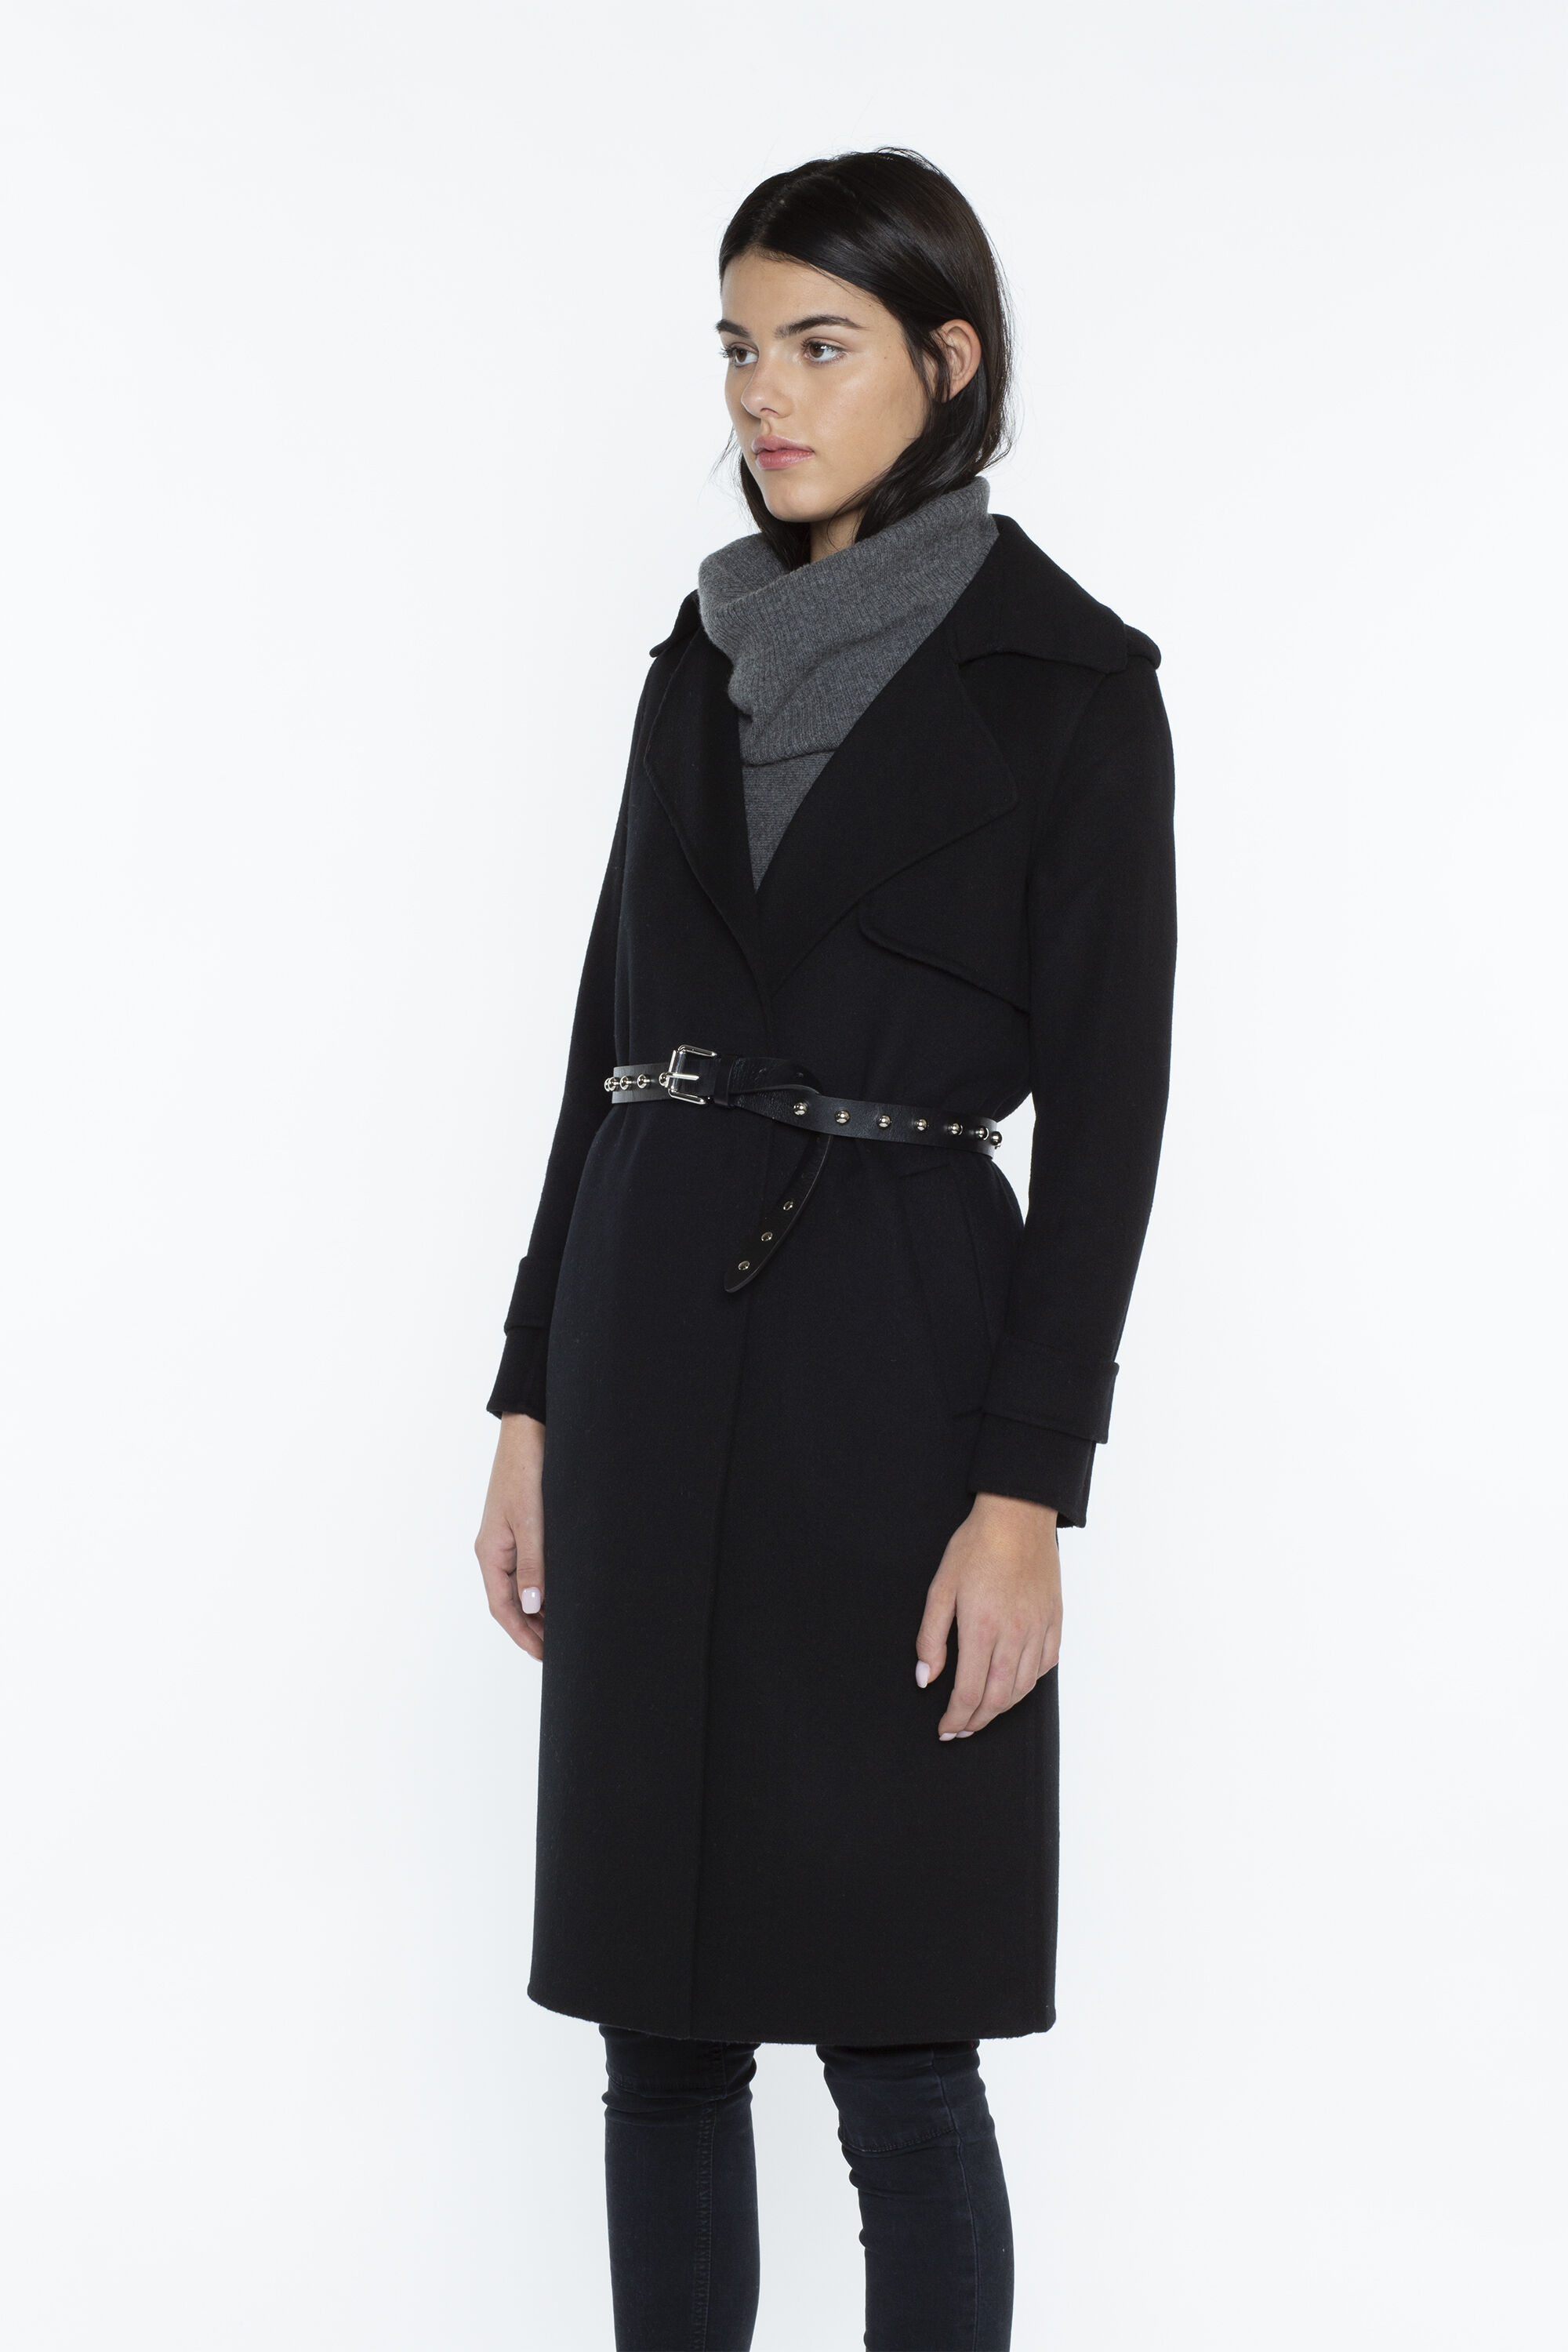 JENNIE LIU Women's Cashmere Wool Double-faced Trench Coat - J CASHMERE